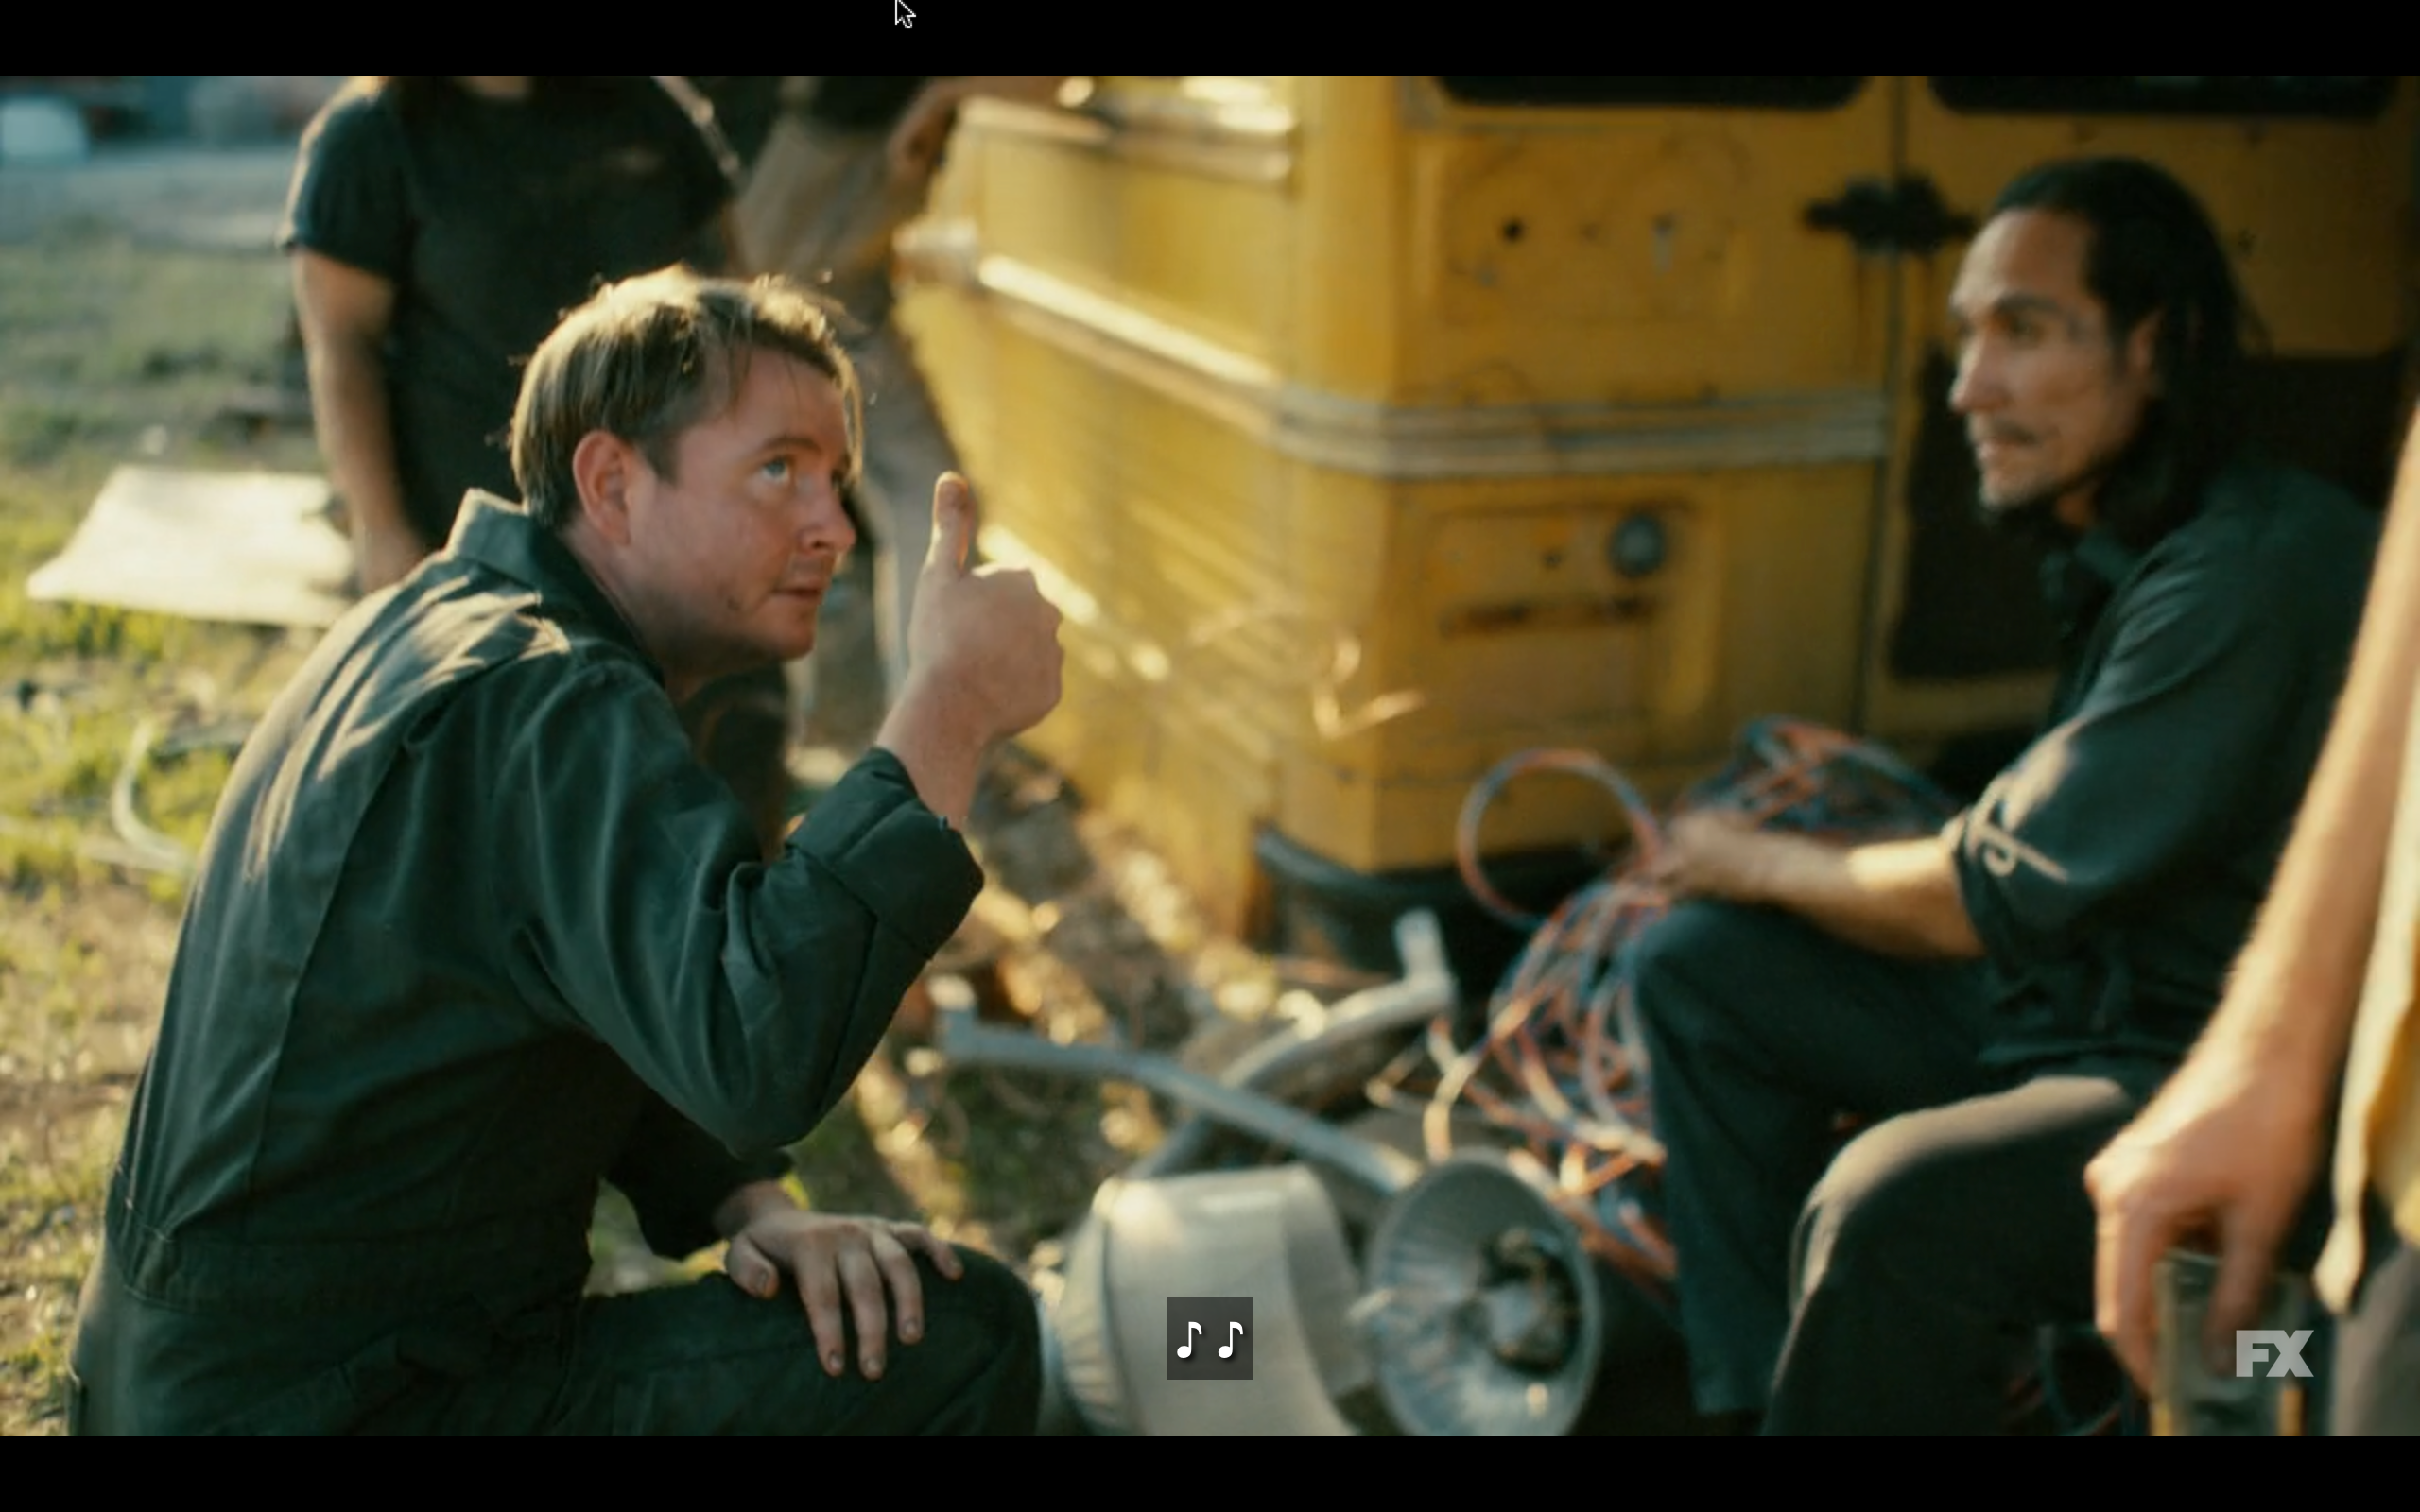 Screen capture with John Fullbright with dirty face, wearing coveralls, holding one thumb up